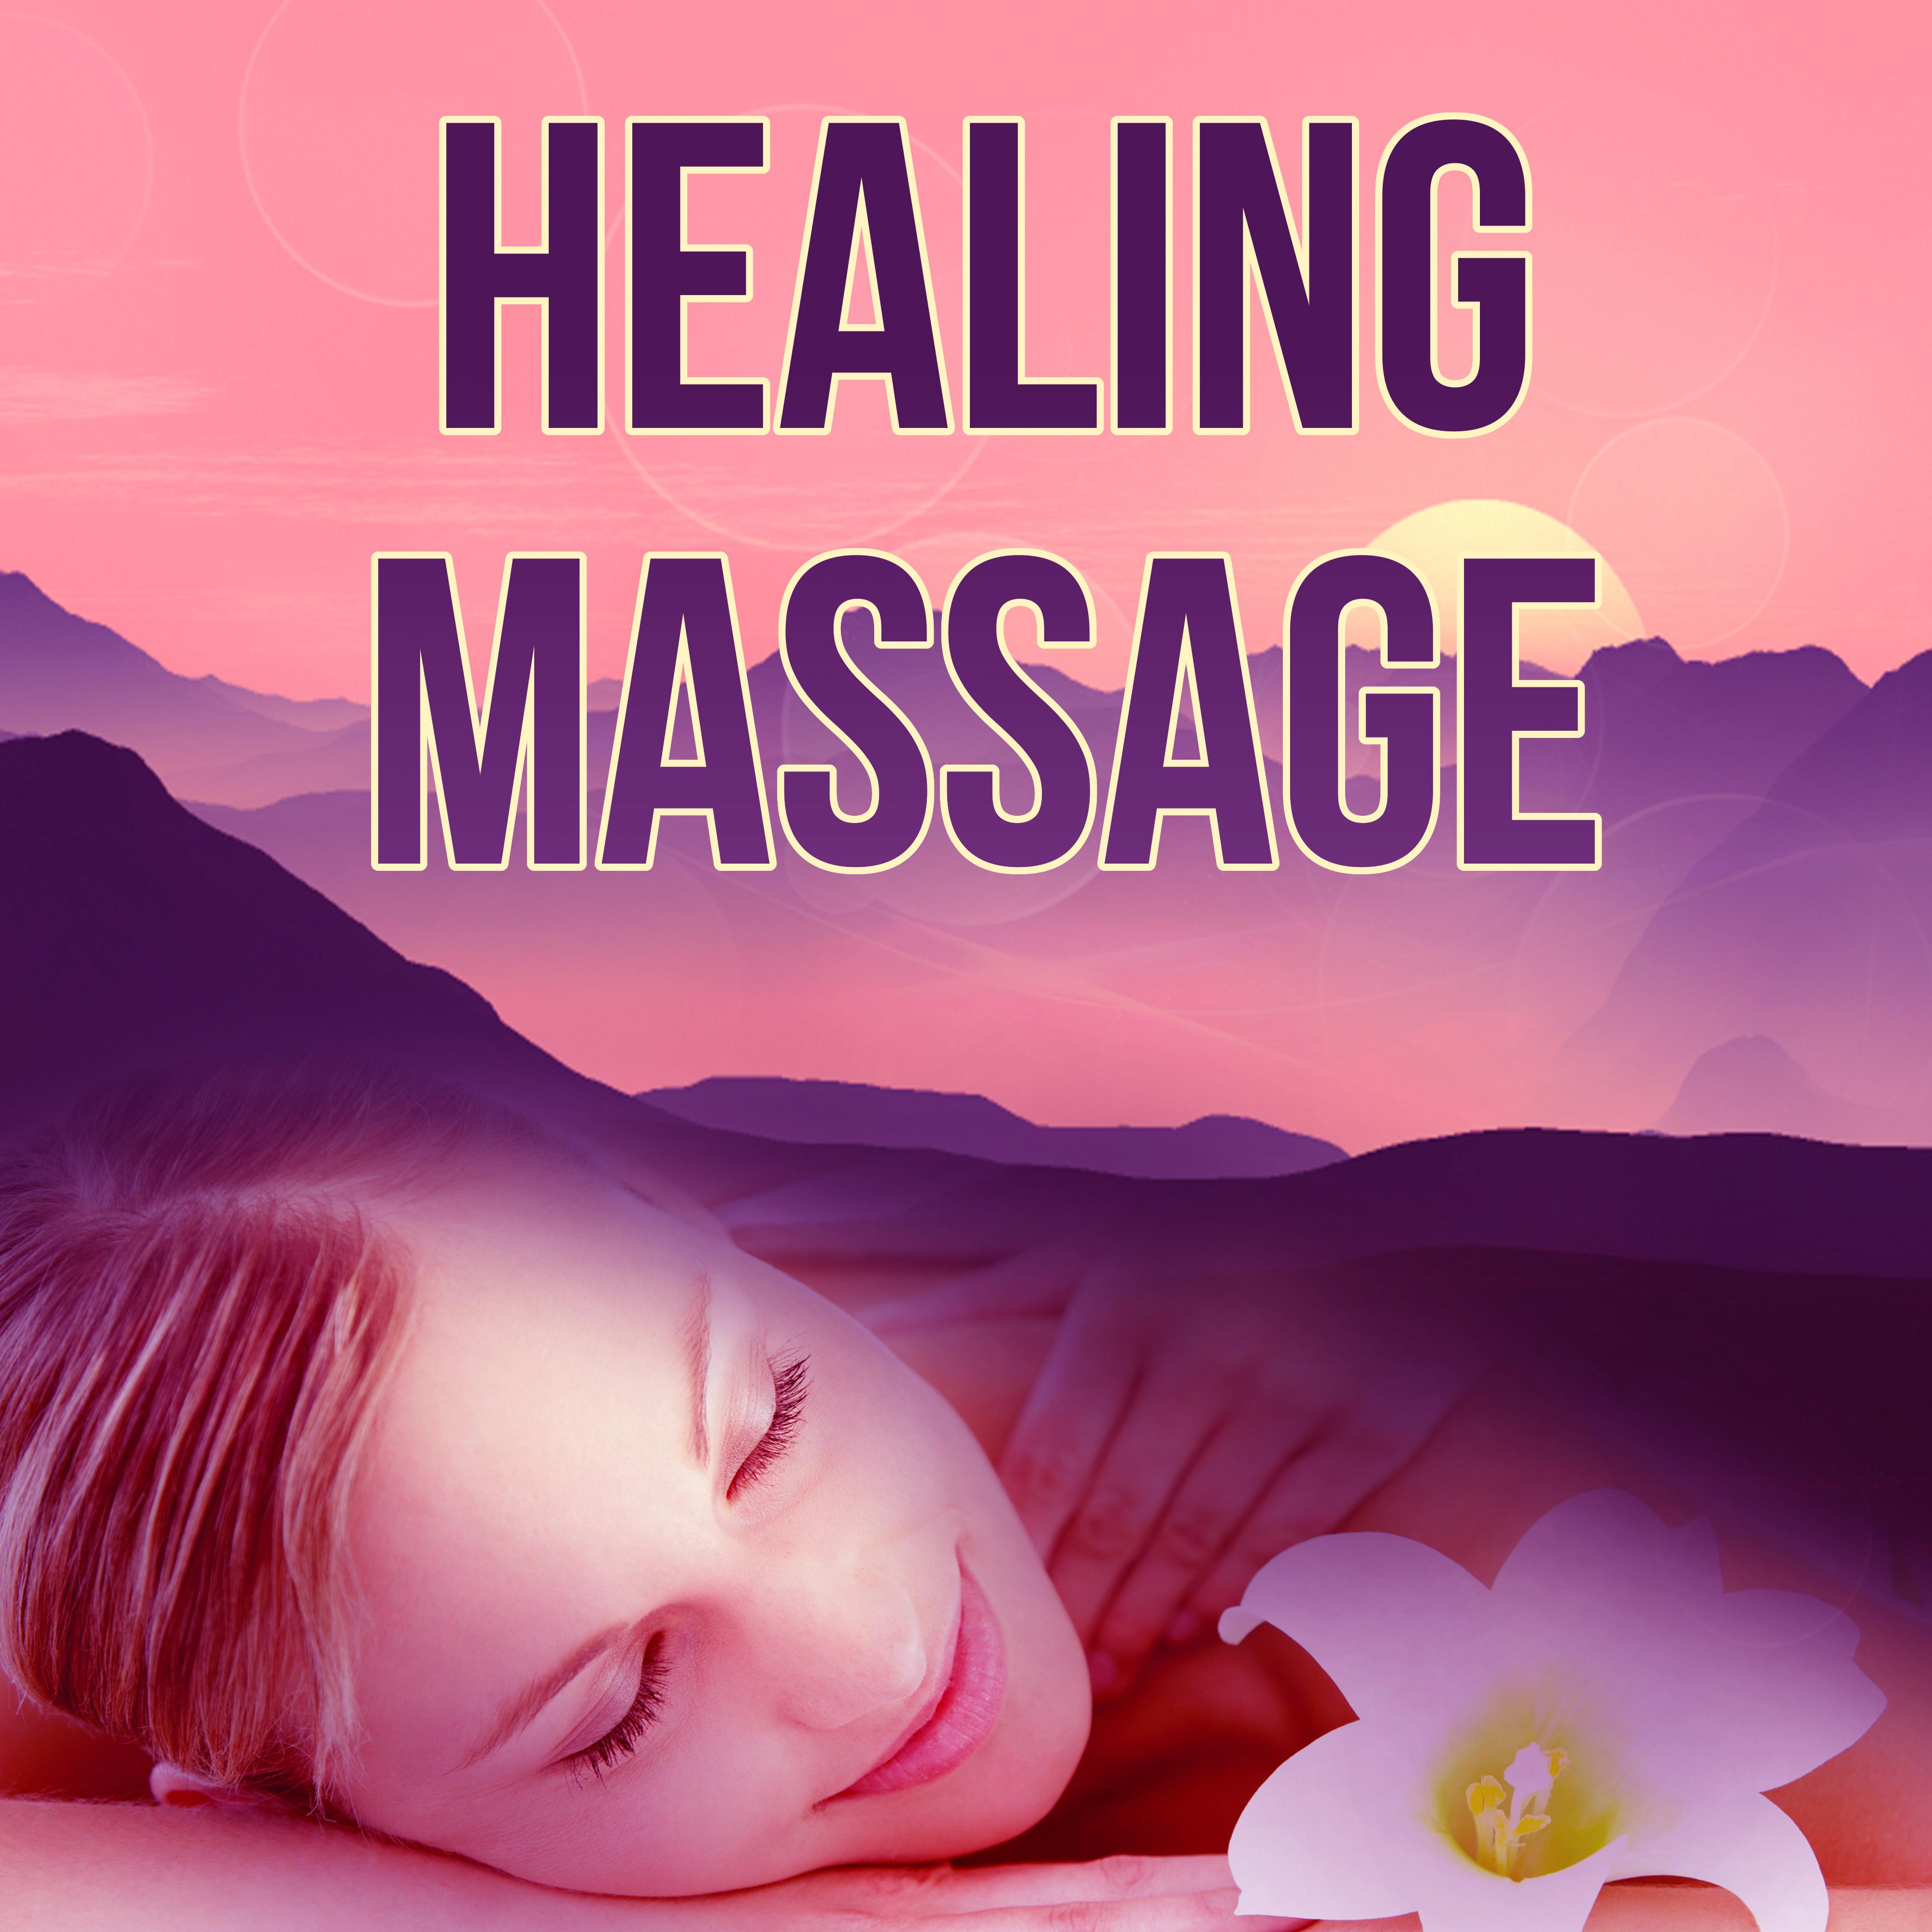 Healing Massage - Stress Relief, Relaxing Nature Sounds, Mindfulness Meditation, Yoga Poses, Harmony of Senses, Ocean Waves & Healing Touch, Sensual Massage Music for Aromatherapy